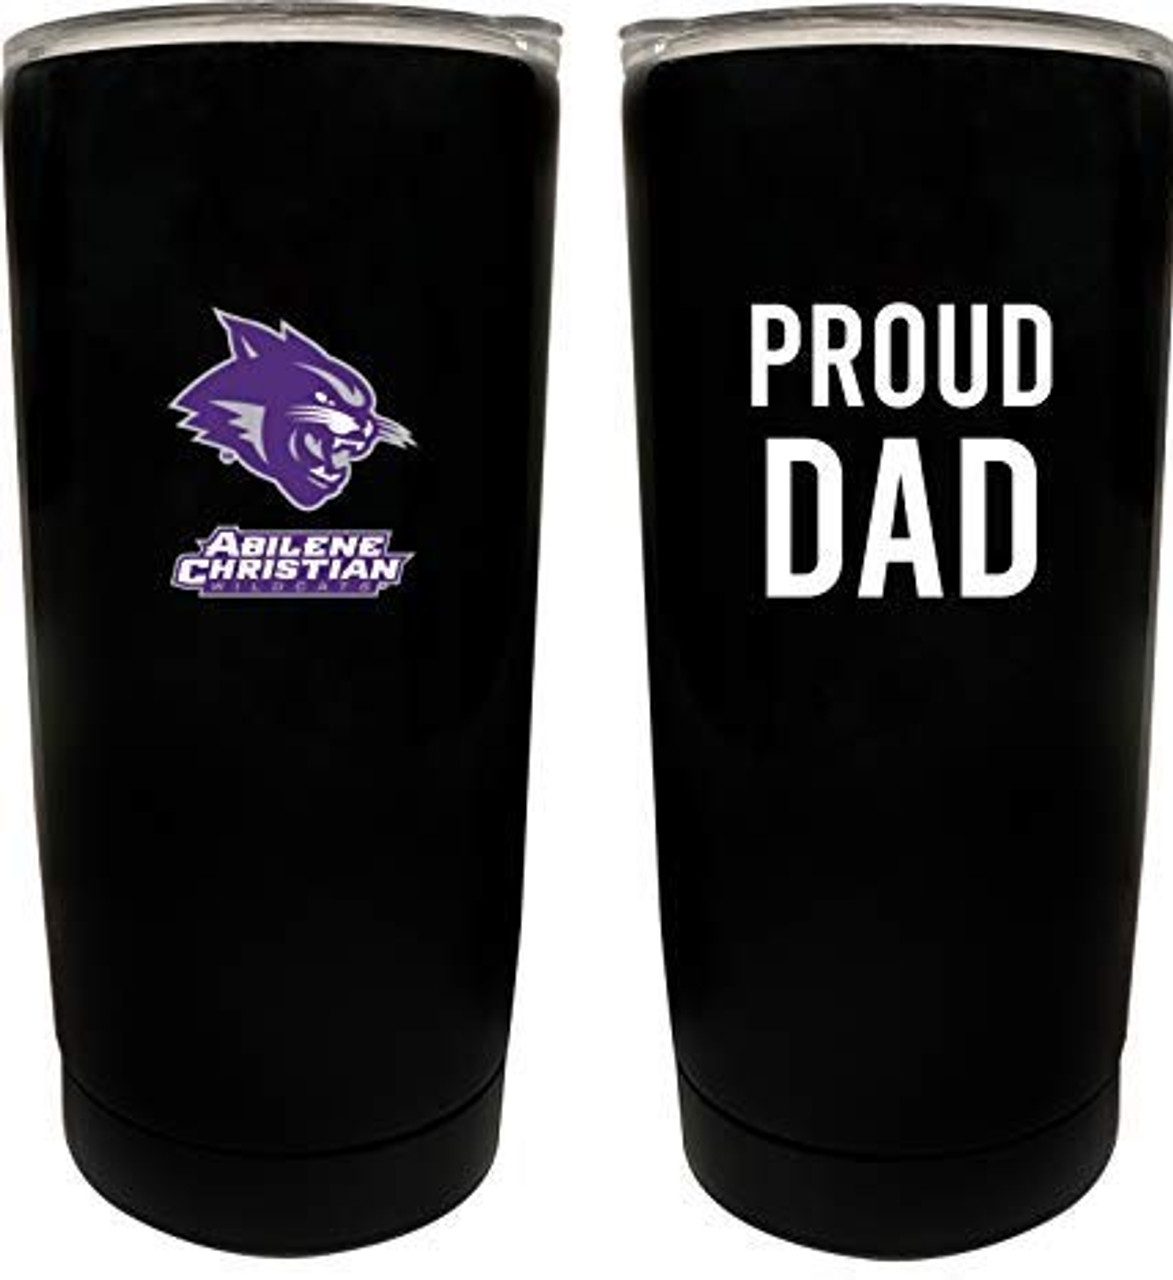 Abilene Christian University Proud Dad 16 oz Insulated Stainless Steel Tumblers